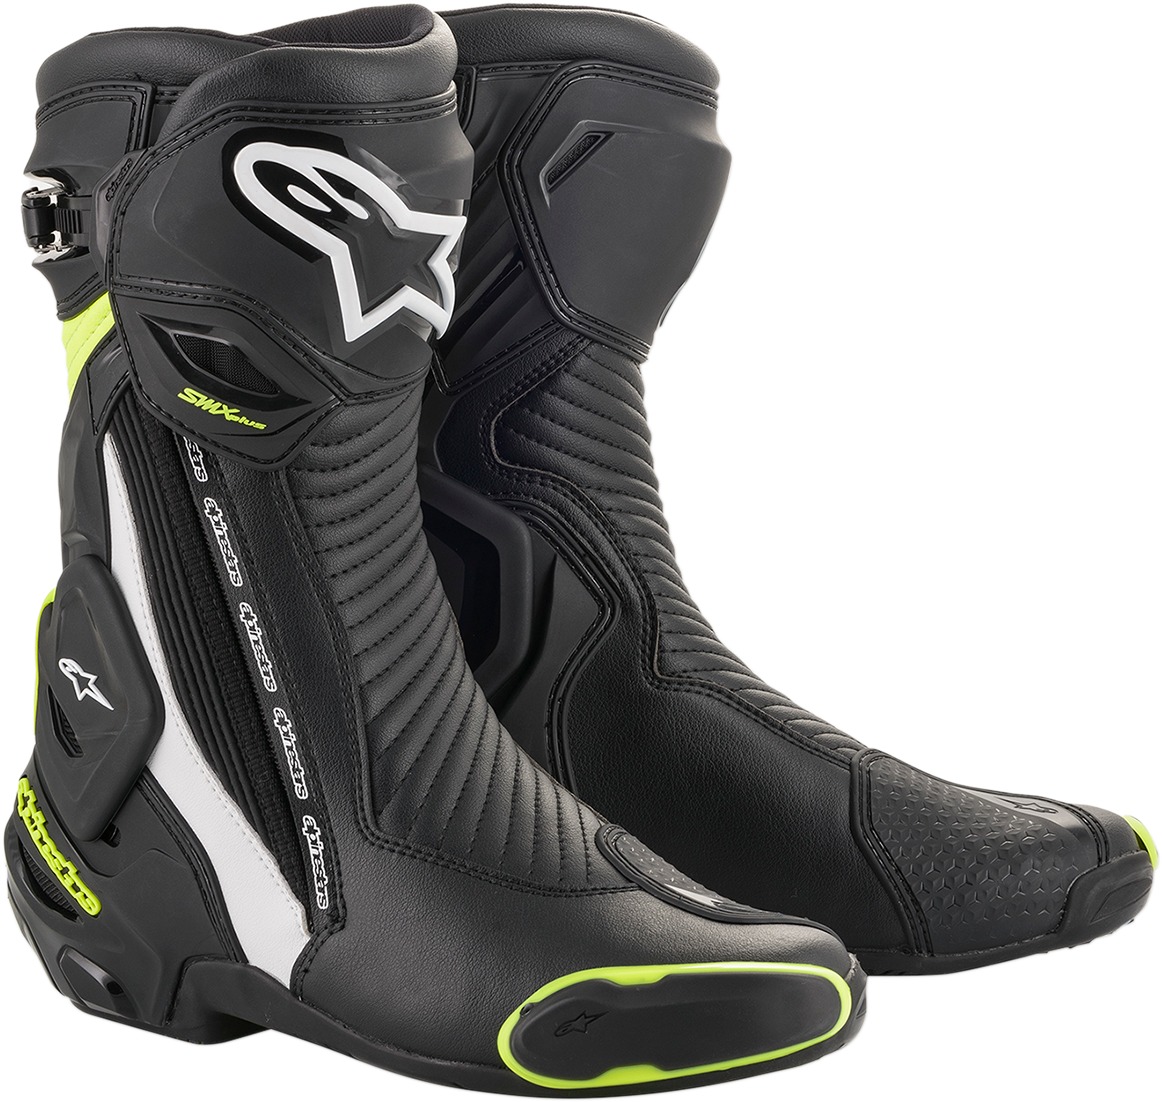 SMX Plus Street Riding Boots Black/White/Yellow US 6.5 - Click Image to Close